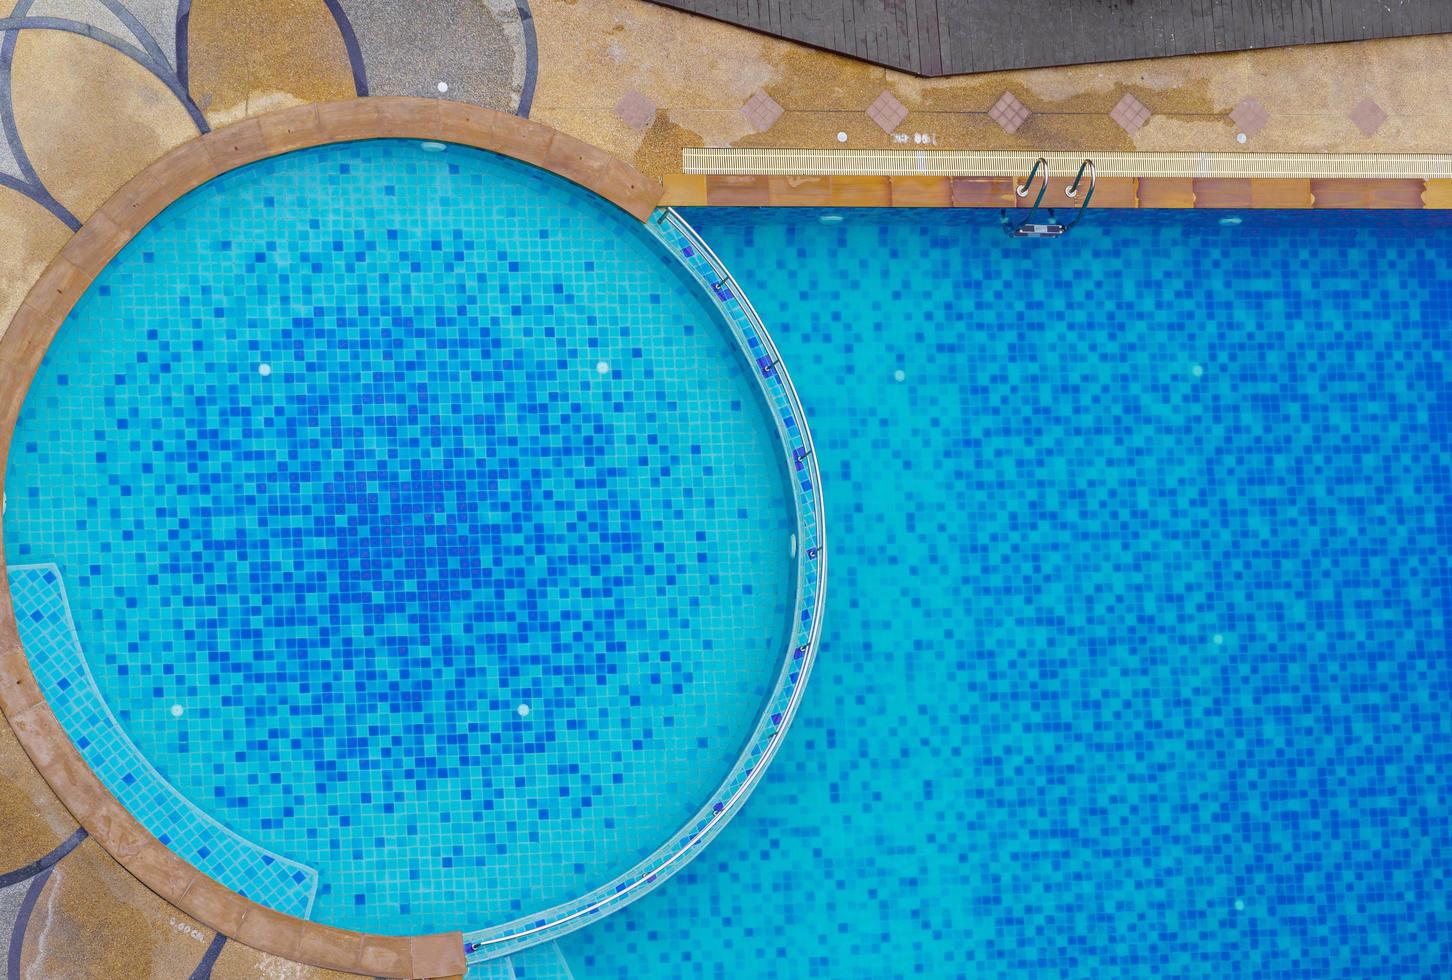 Top view of a swimming pool at the edge photo